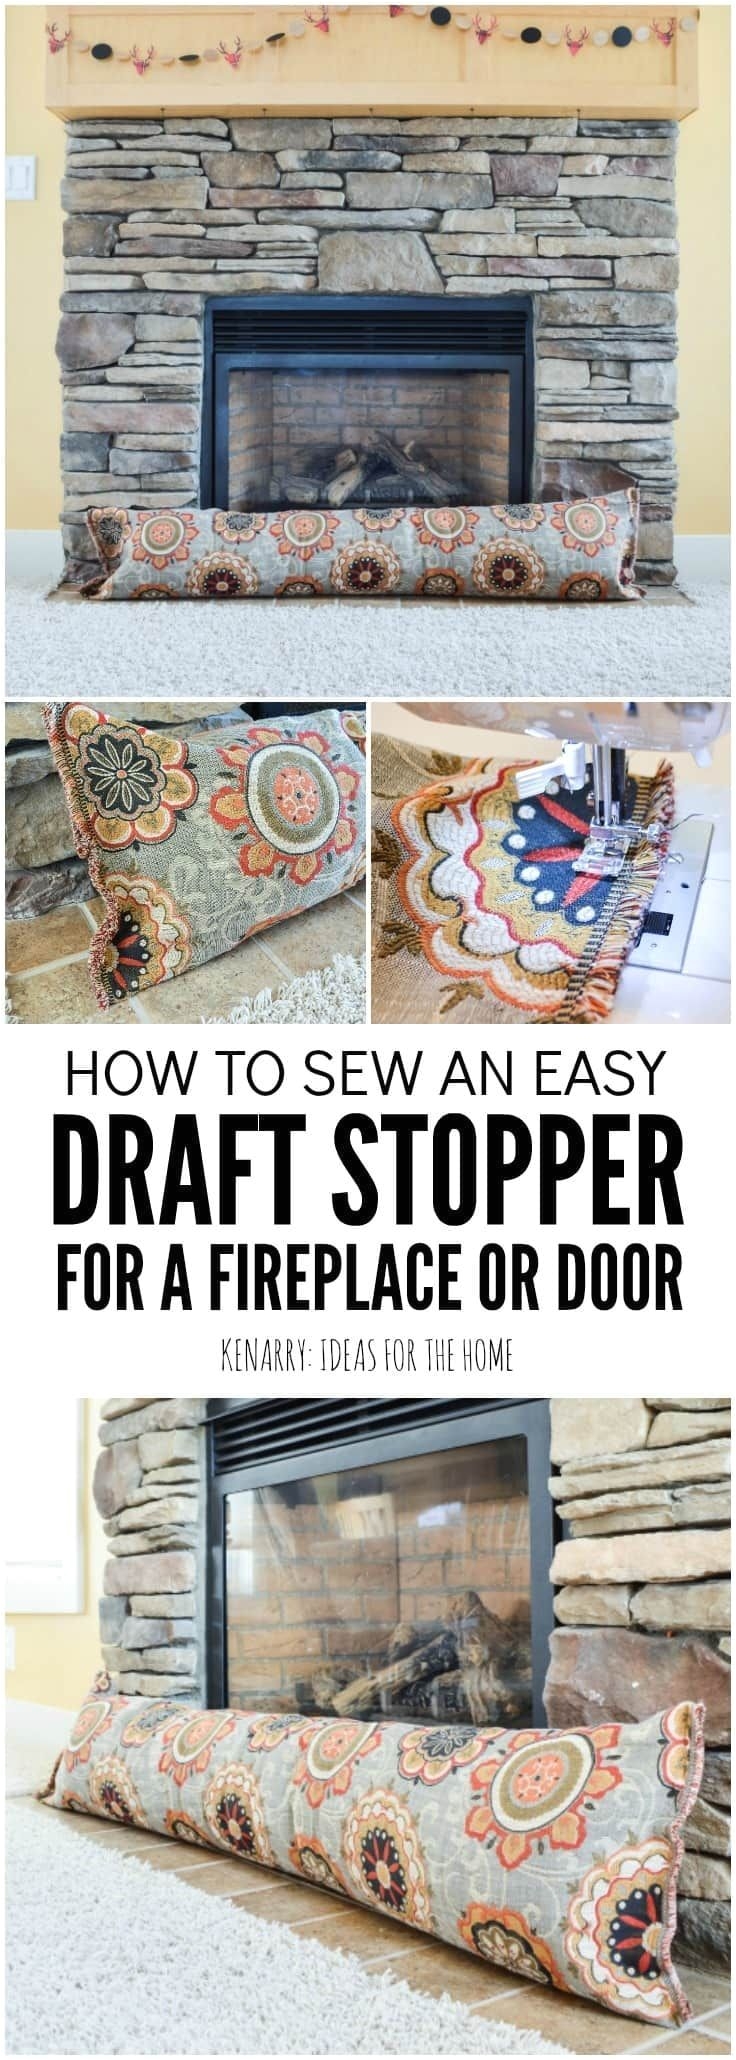 fireplace draft stopper an easy diy sewing tutorial